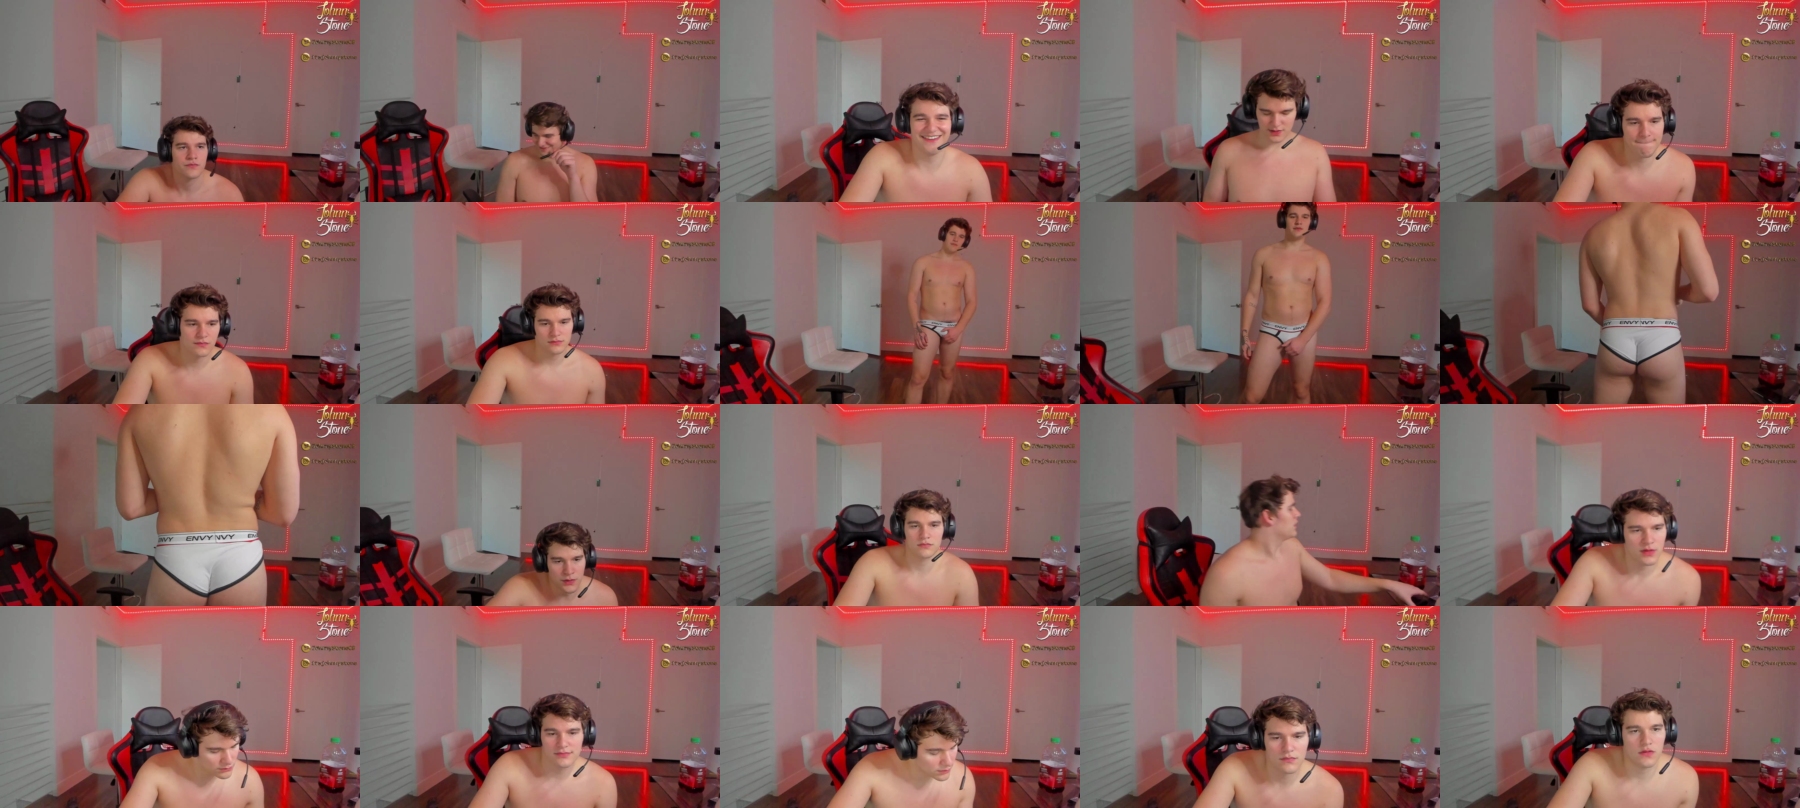 Thejohnnystone  05-08-2021 Male Naked